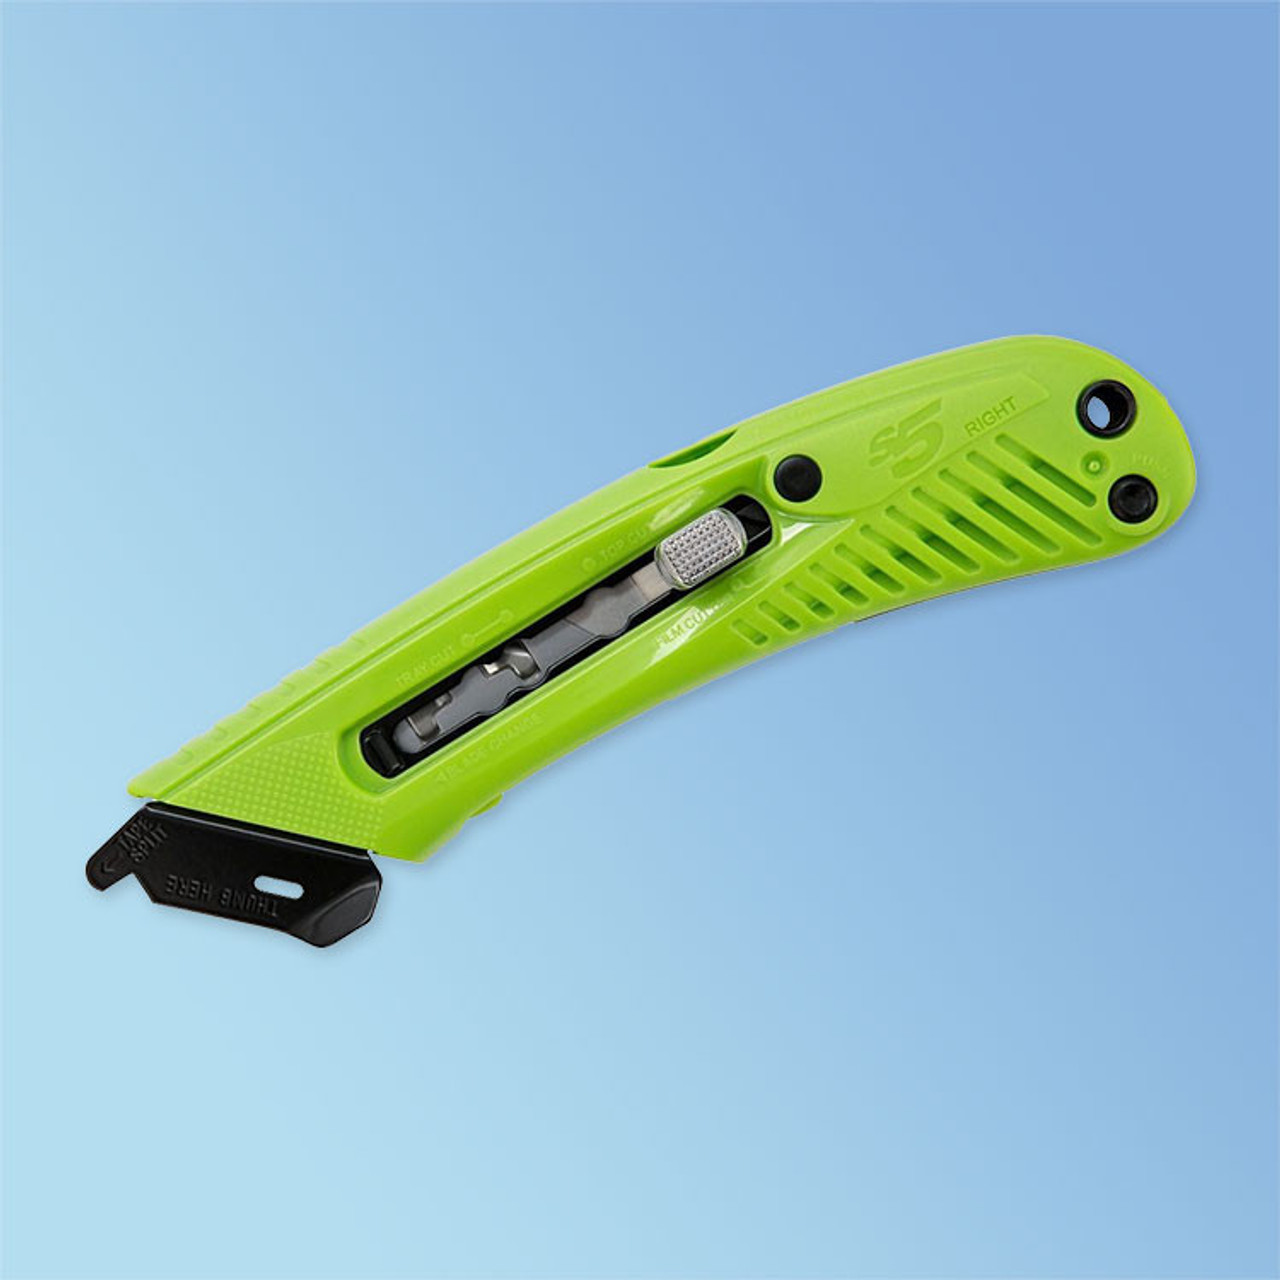 https://cdn11.bigcommerce.com/s-sb8f5ei7ew/images/stencil/1280x1280/products/3912/30058/pacific-handy-cutter-s5r-s5-safety-cutter-utility-knife-each__20869.1668898458.jpg?c=2